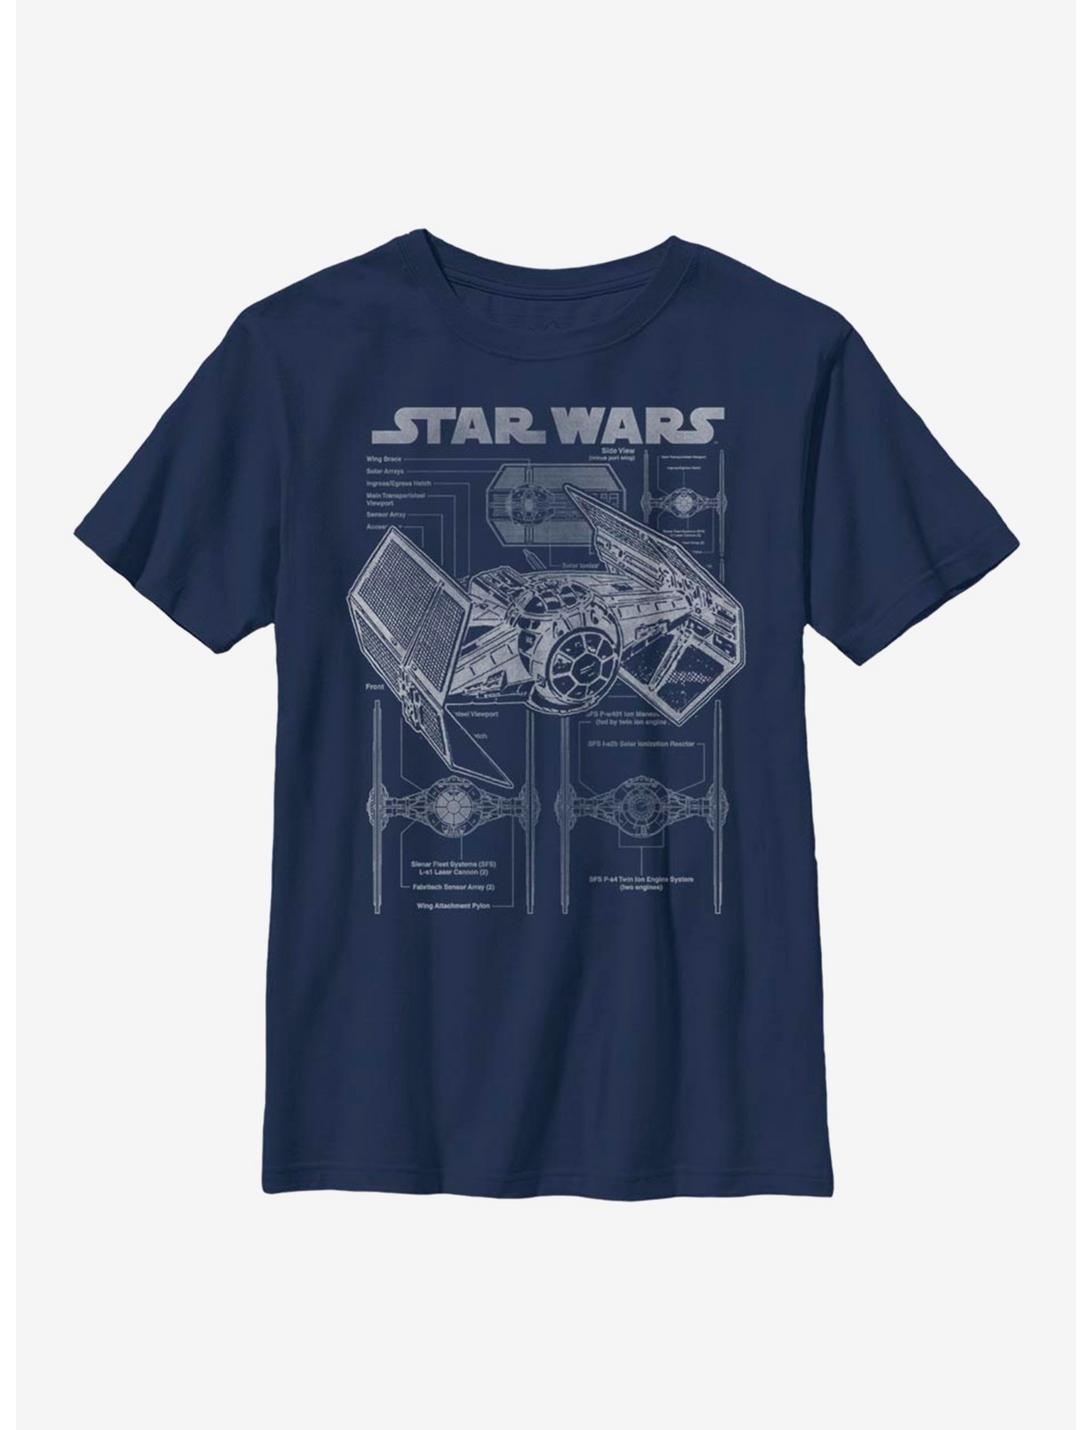 Star Wars Tie Fighter Youth T-Shirt, NAVY, hi-res